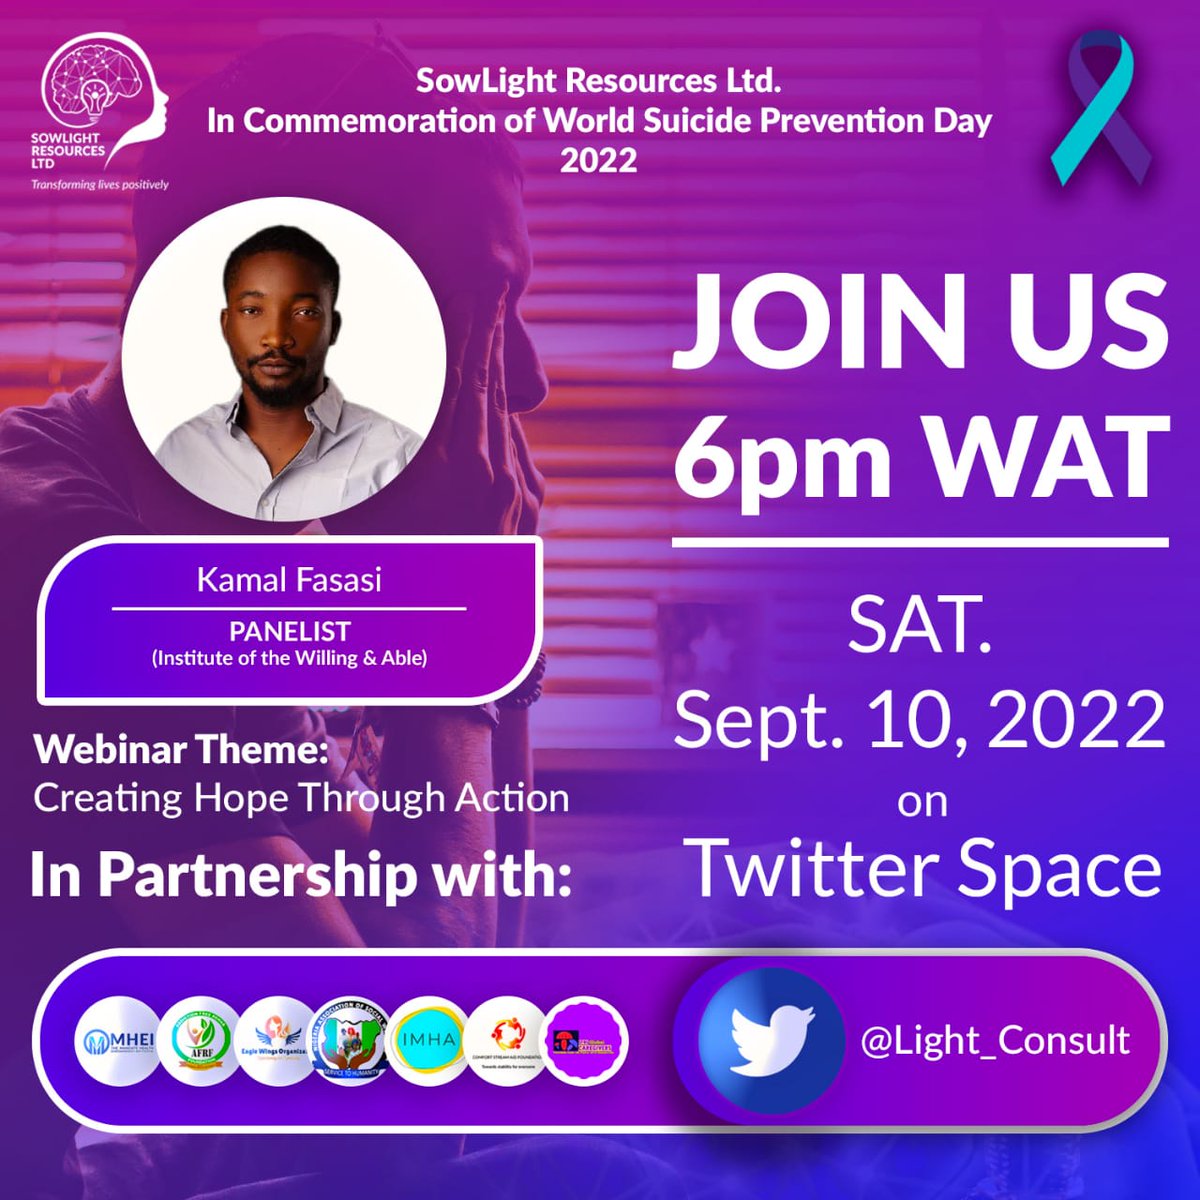 It's #SuicidePreventionMonth Meet one of our panelists for the day Kamal Fasasi, @IOWAA9. Don't forget the session promises to be educative, interactive and empowering. Don't miss it for anything... @GikonyoMaureen @angiyo58 @BasseeyA @officialpraiseA @Ayomide208